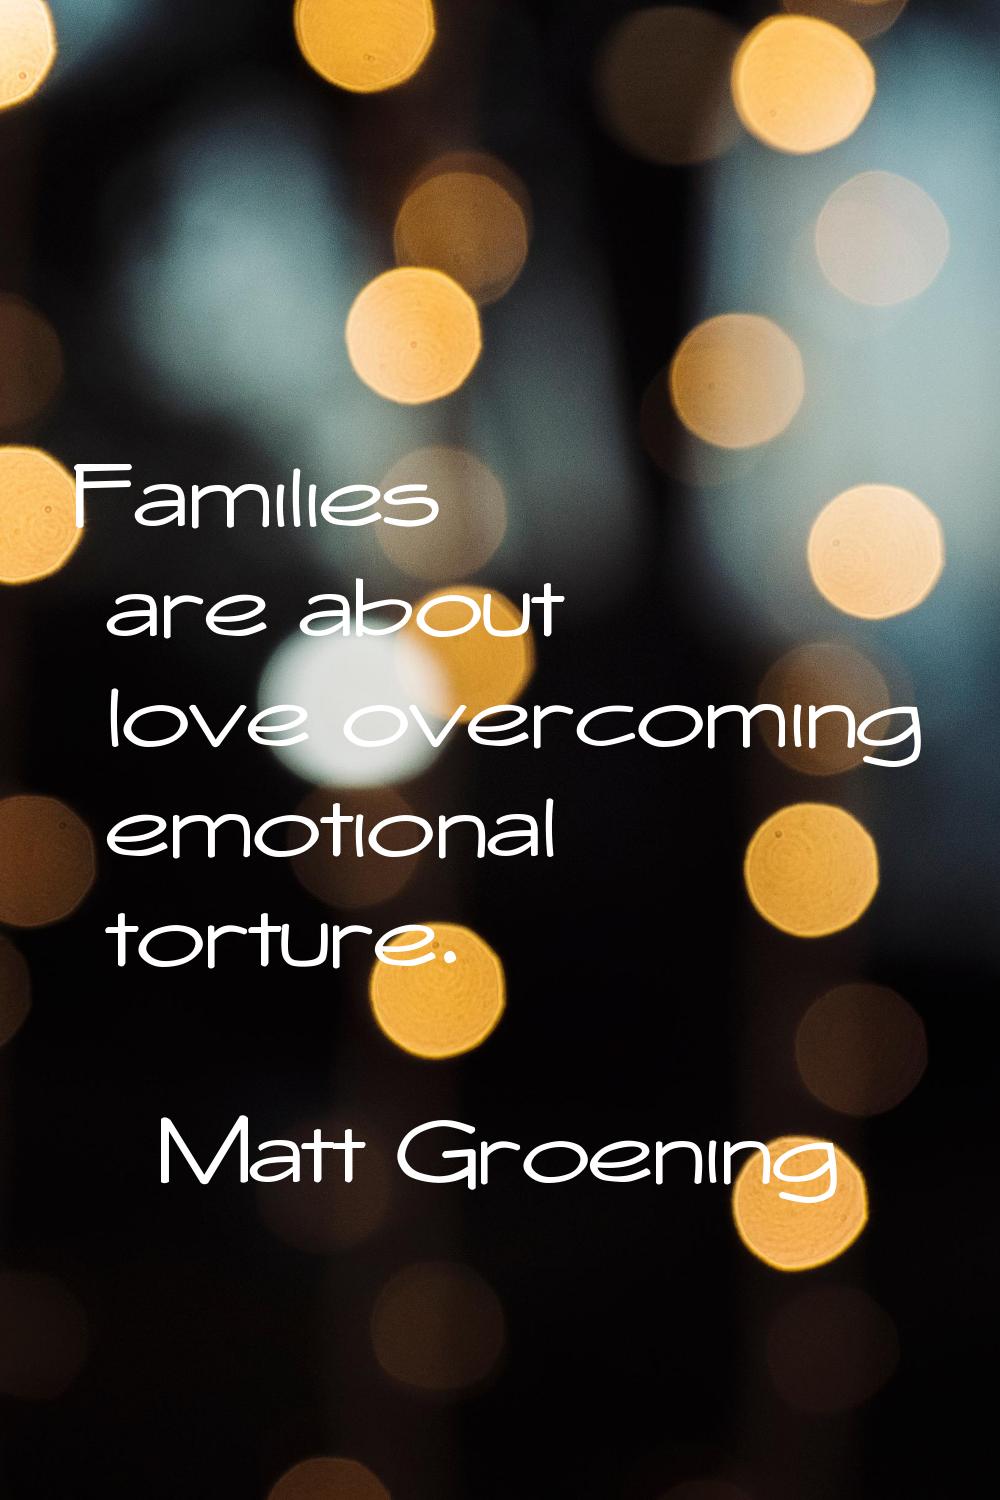 Families are about love overcoming emotional torture.